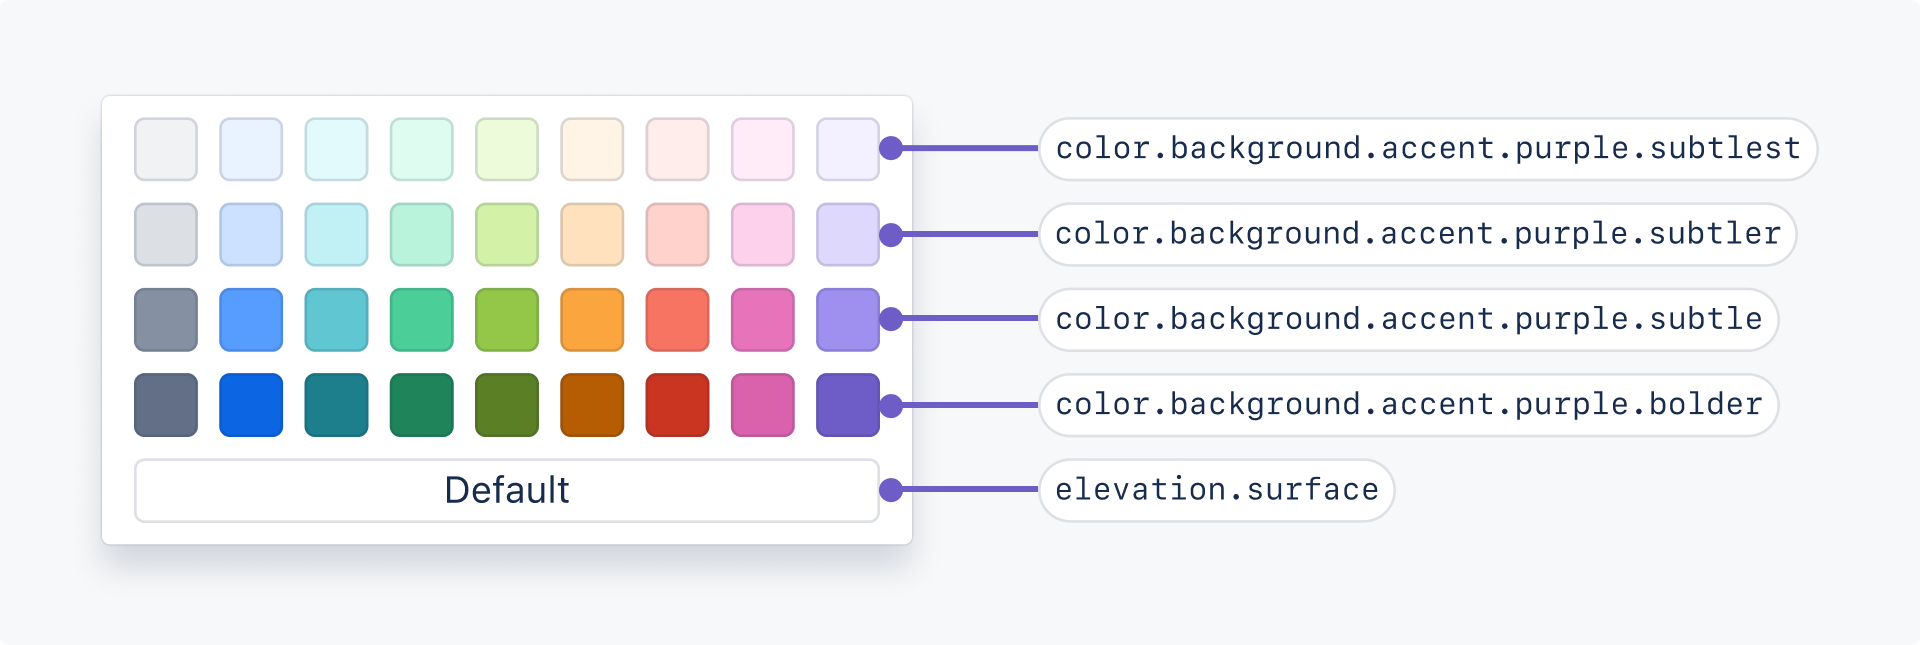 A background color picker with four shades per color. There is a label pointing to each shade of purple as well as the default color option. From most subtle to bold, the labels say color.background.accent.purple.subtlest, color.background.accent.purple.subtler, color.background.accent.purple.subtle, color.background.accent.purple.bolder, and elevation.surface.